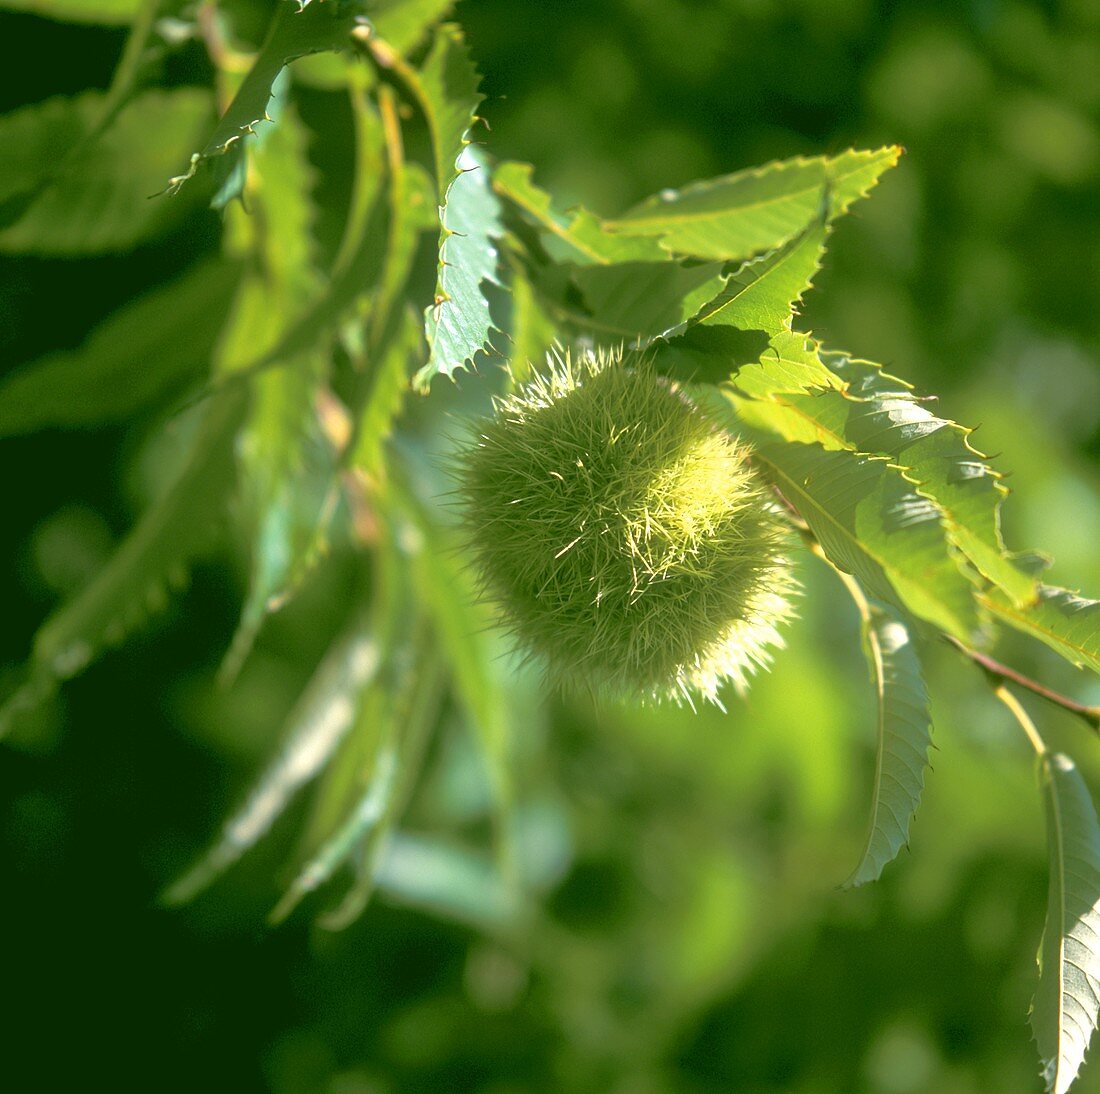 Sweet chestnuts on the branch